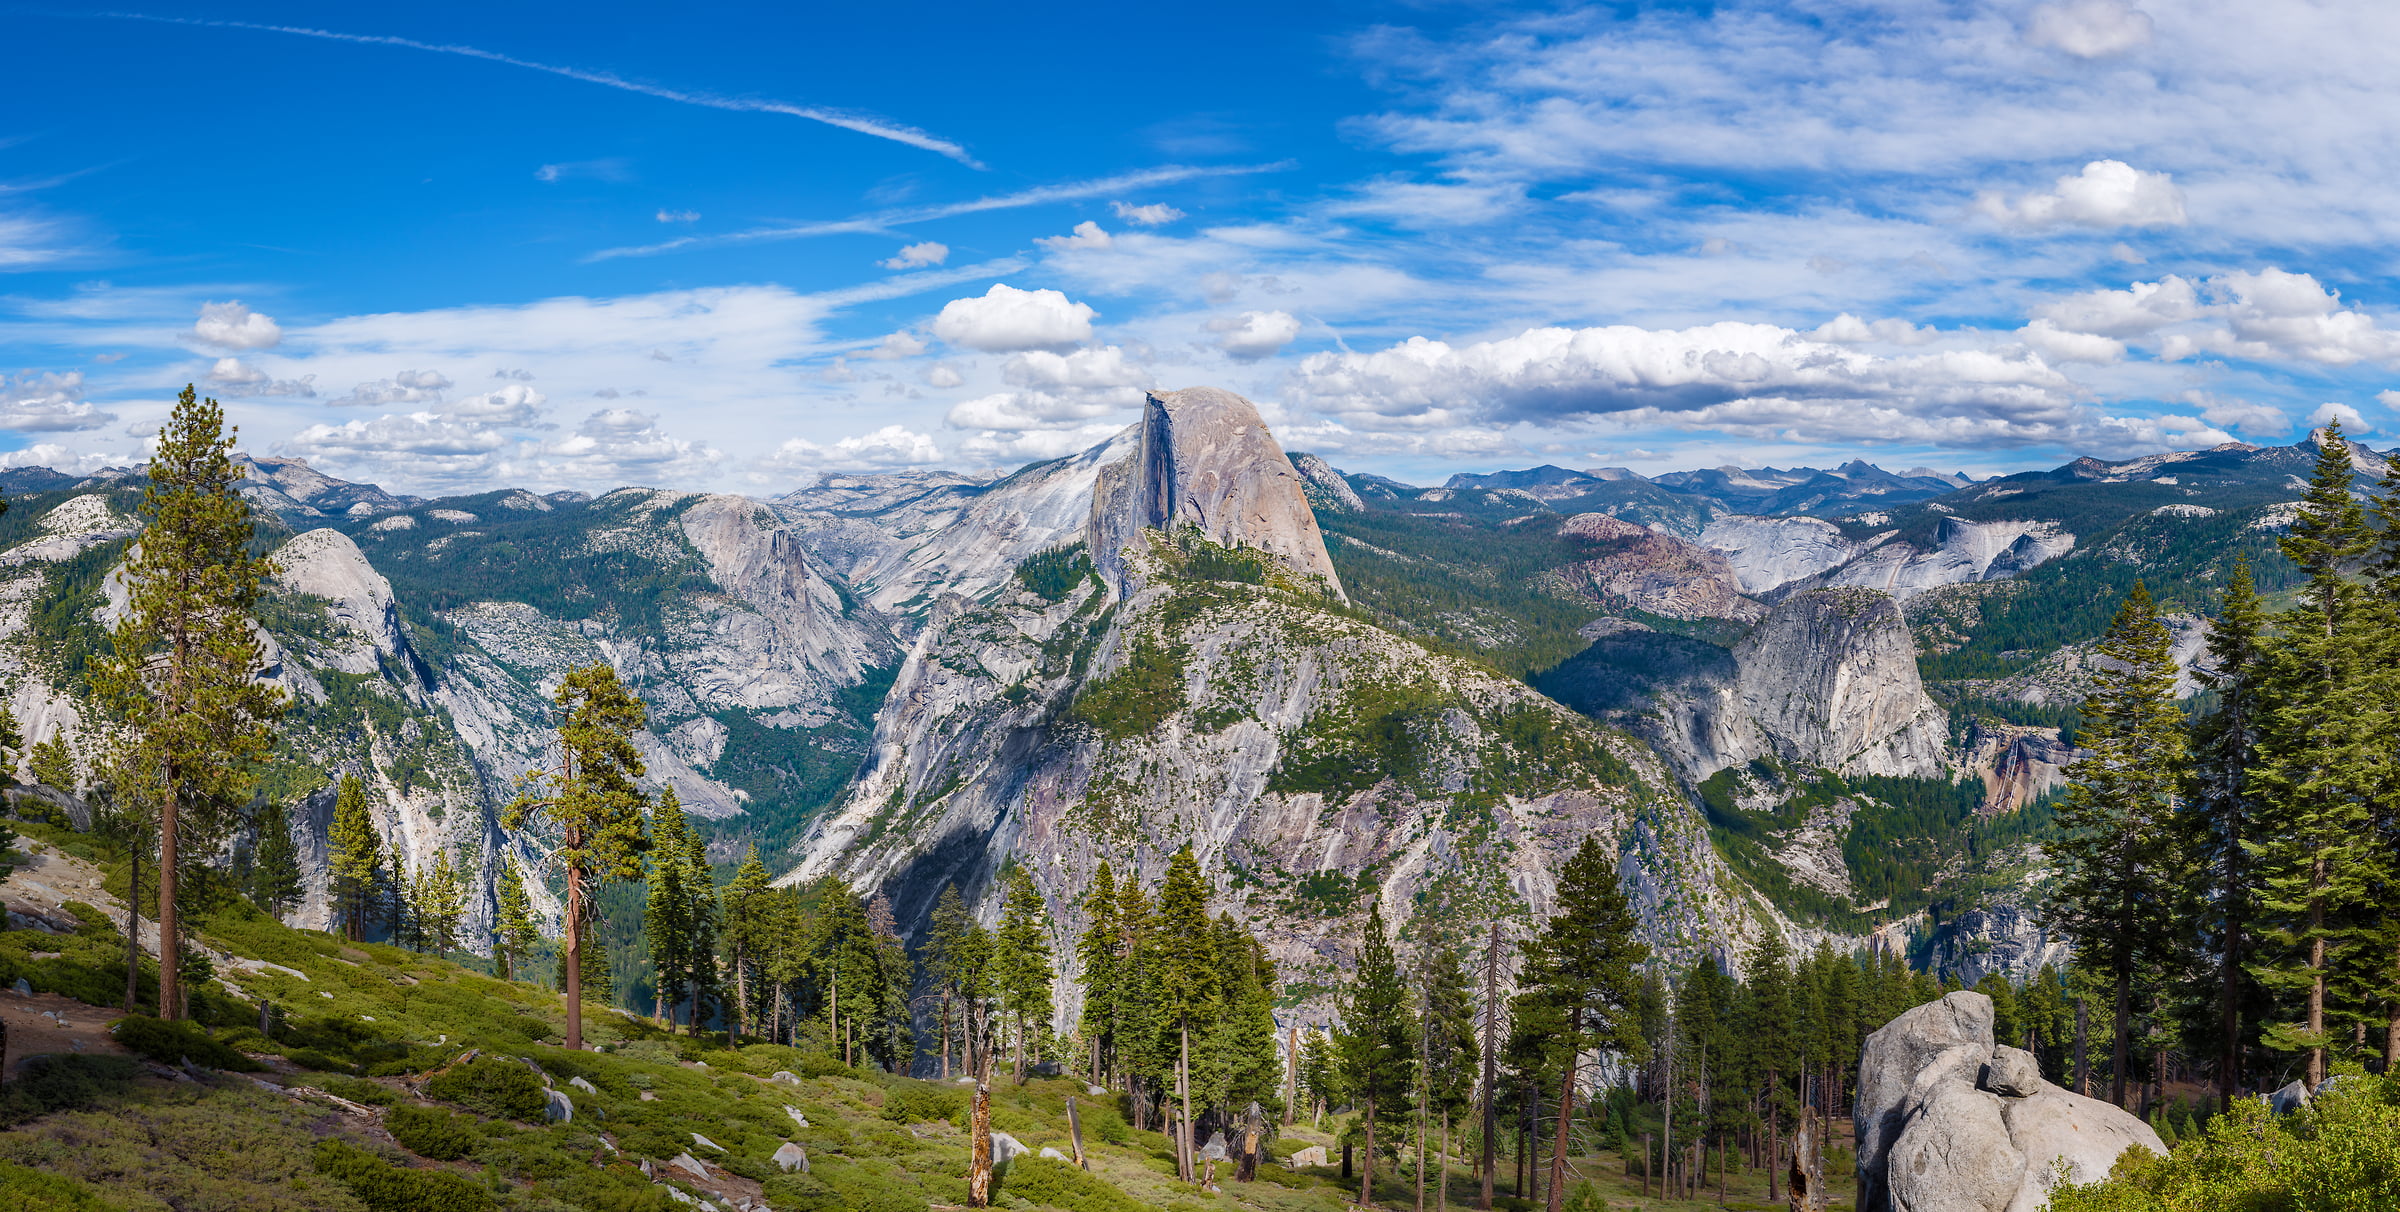 288 megapixels! A very high resolution, large-format VAST photo of an American landscape with an idyllic valley; fine art landscape photograph created by Jim Tarpo in Half Dome, Yosemite National Park, California